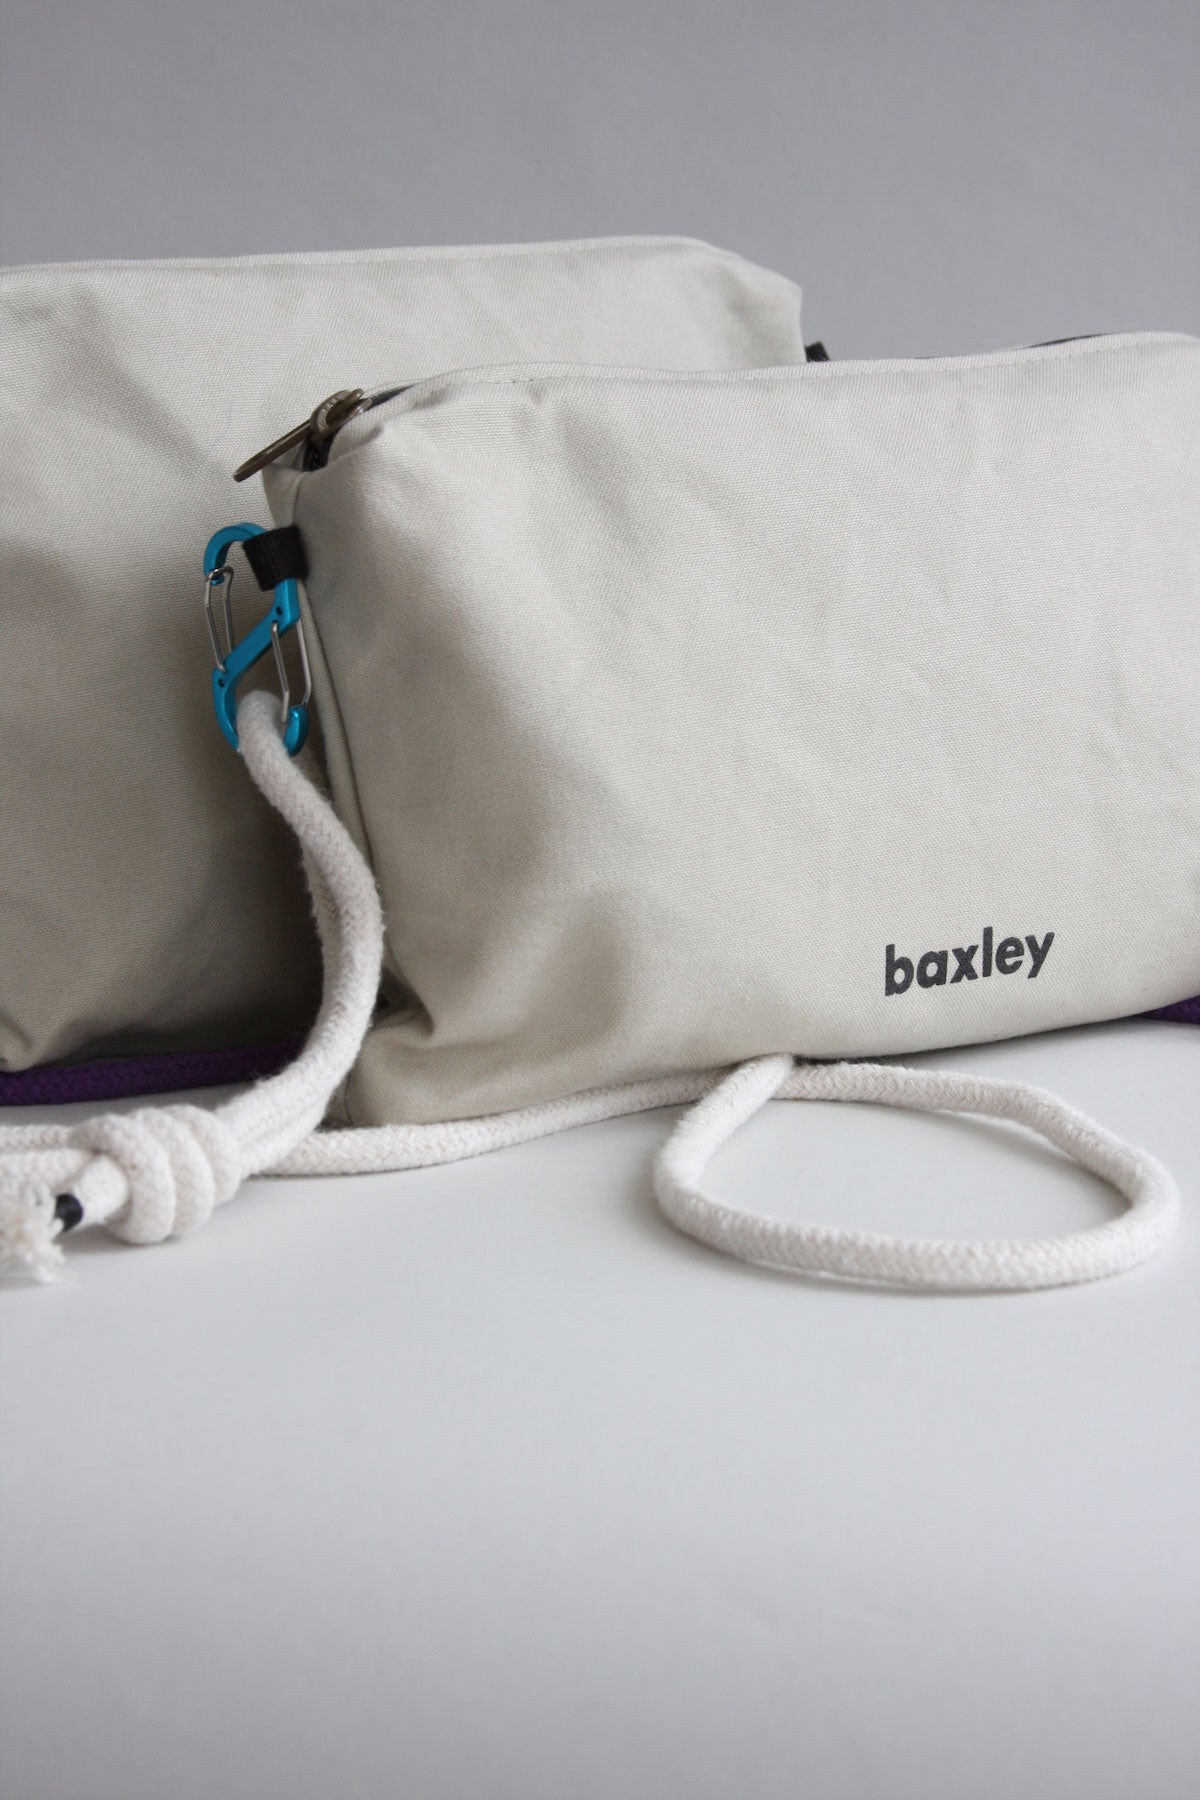 A close-up of Baxley's Effie crossbody bag in chalk white with a white rope strap and blue carabiner clasp.